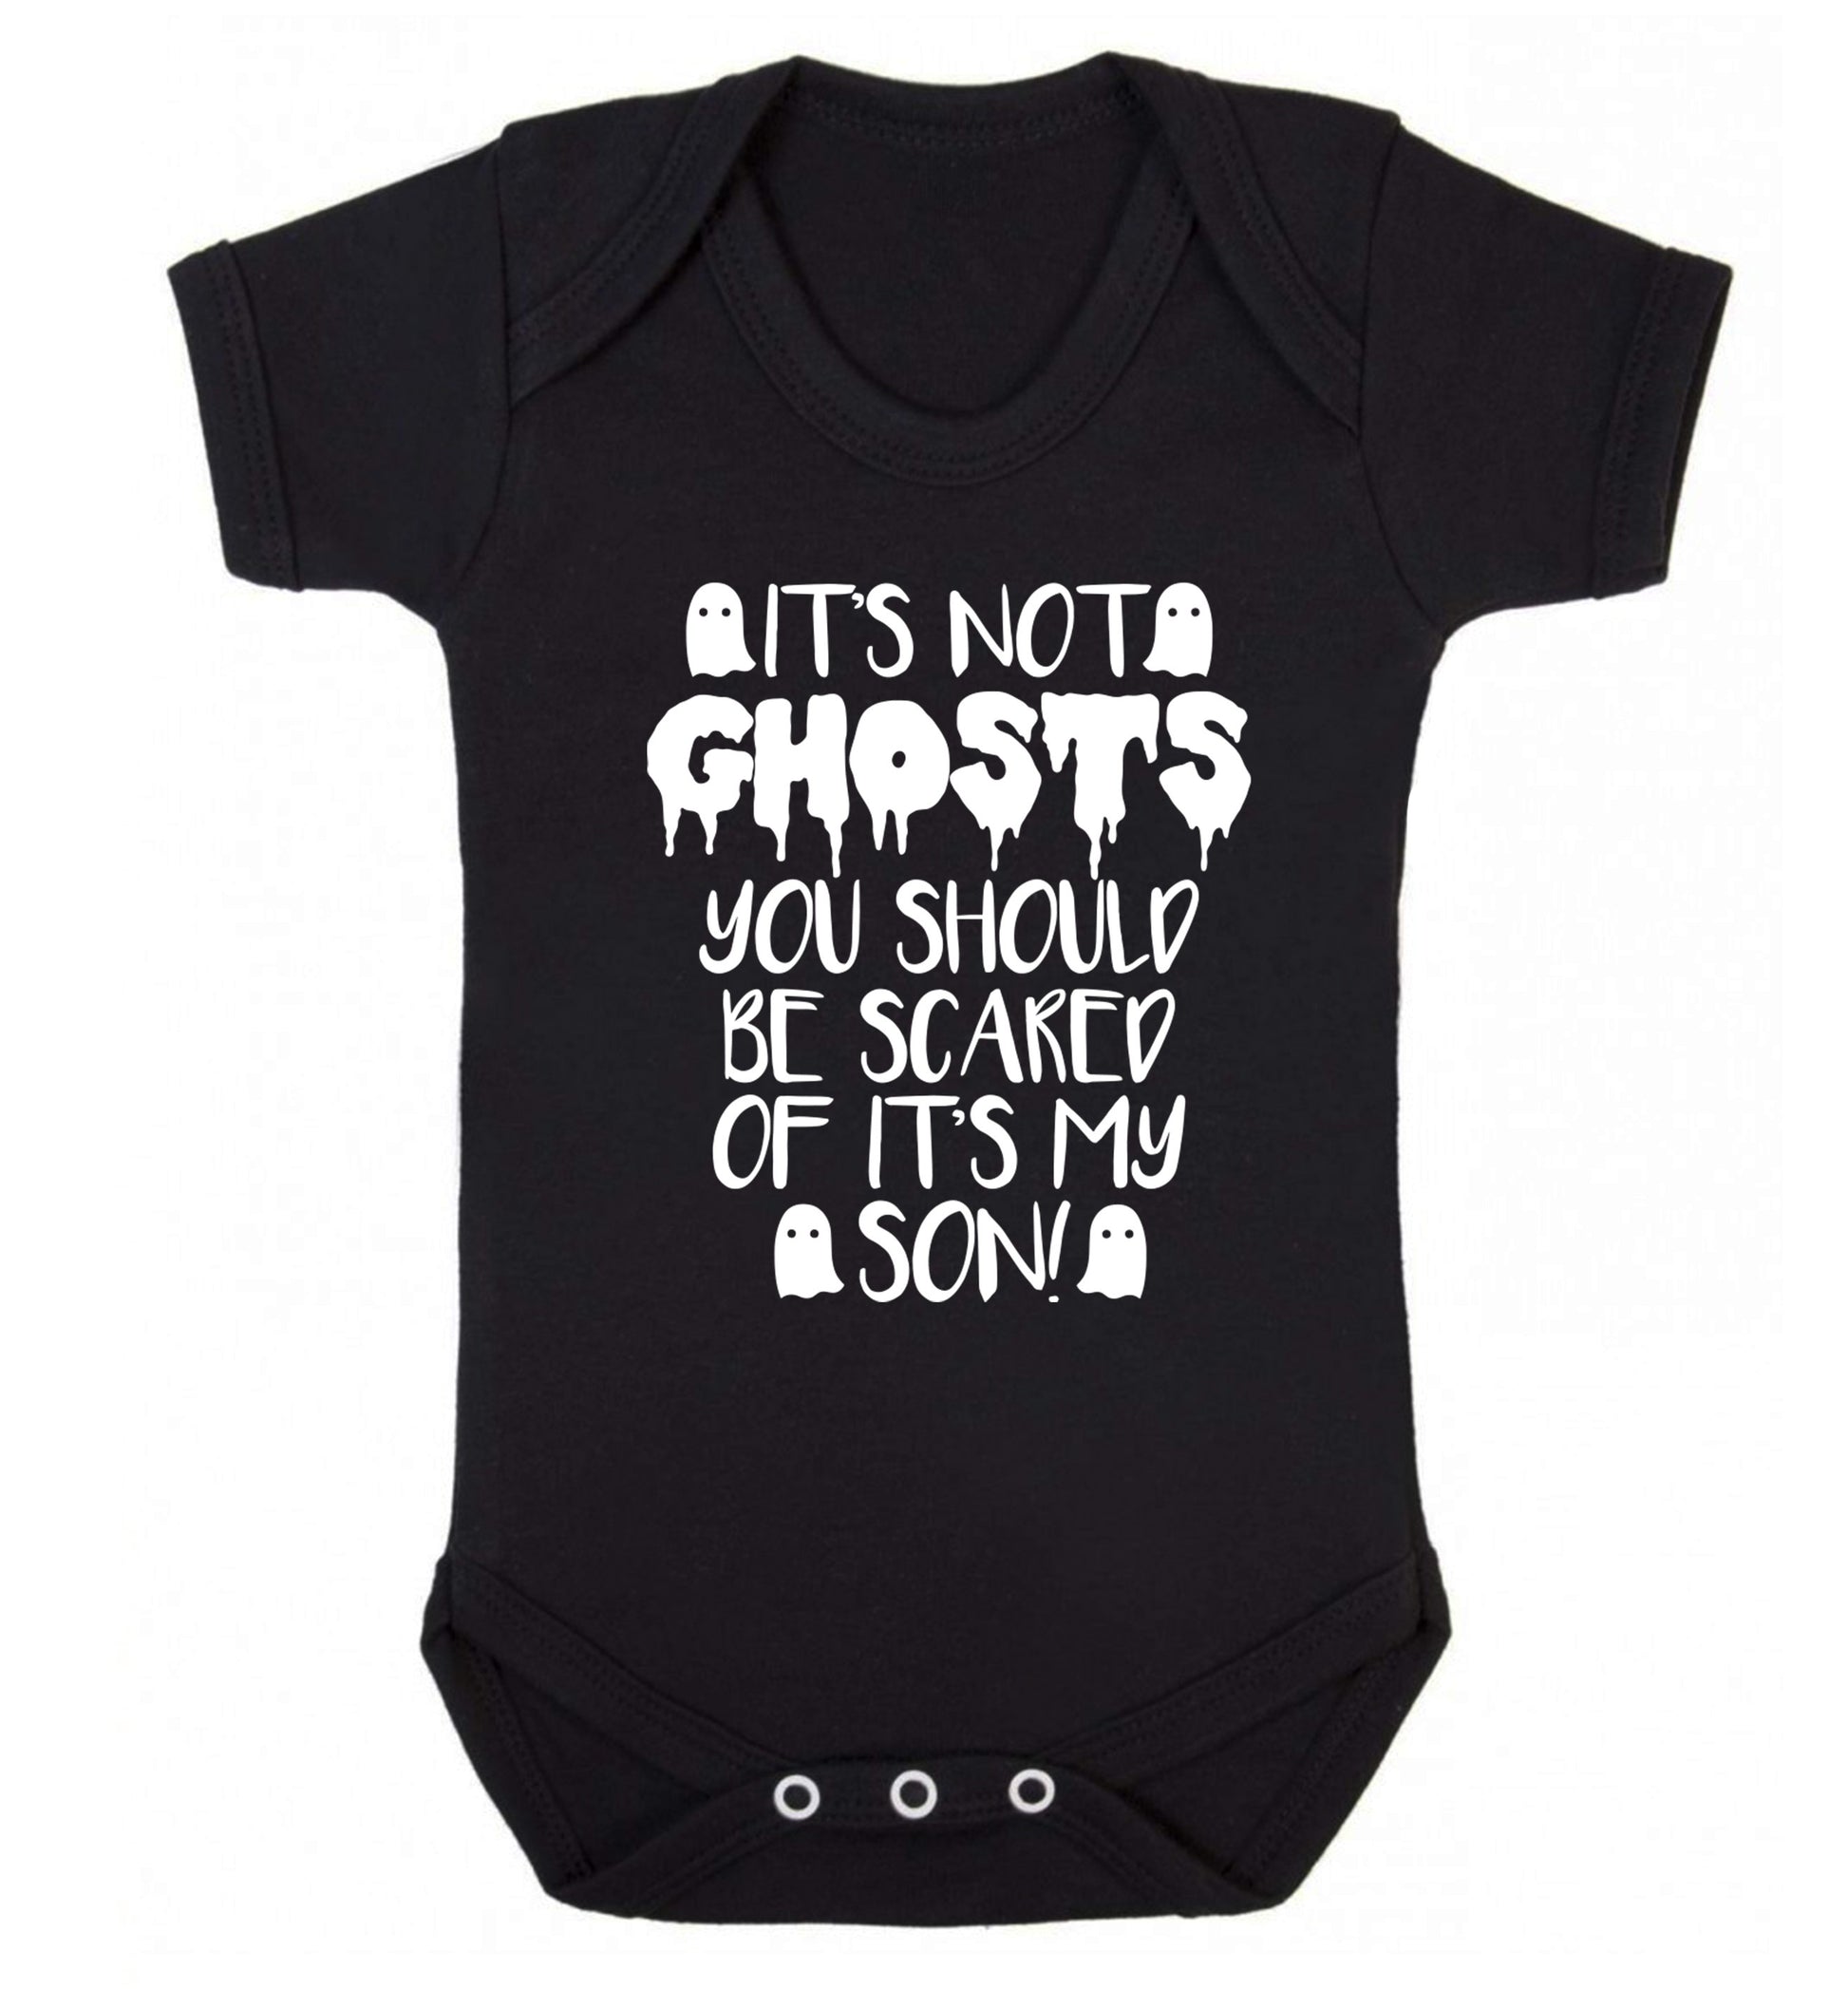 It's not ghosts you should be scared of it's my son! Baby Vest black 18-24 months